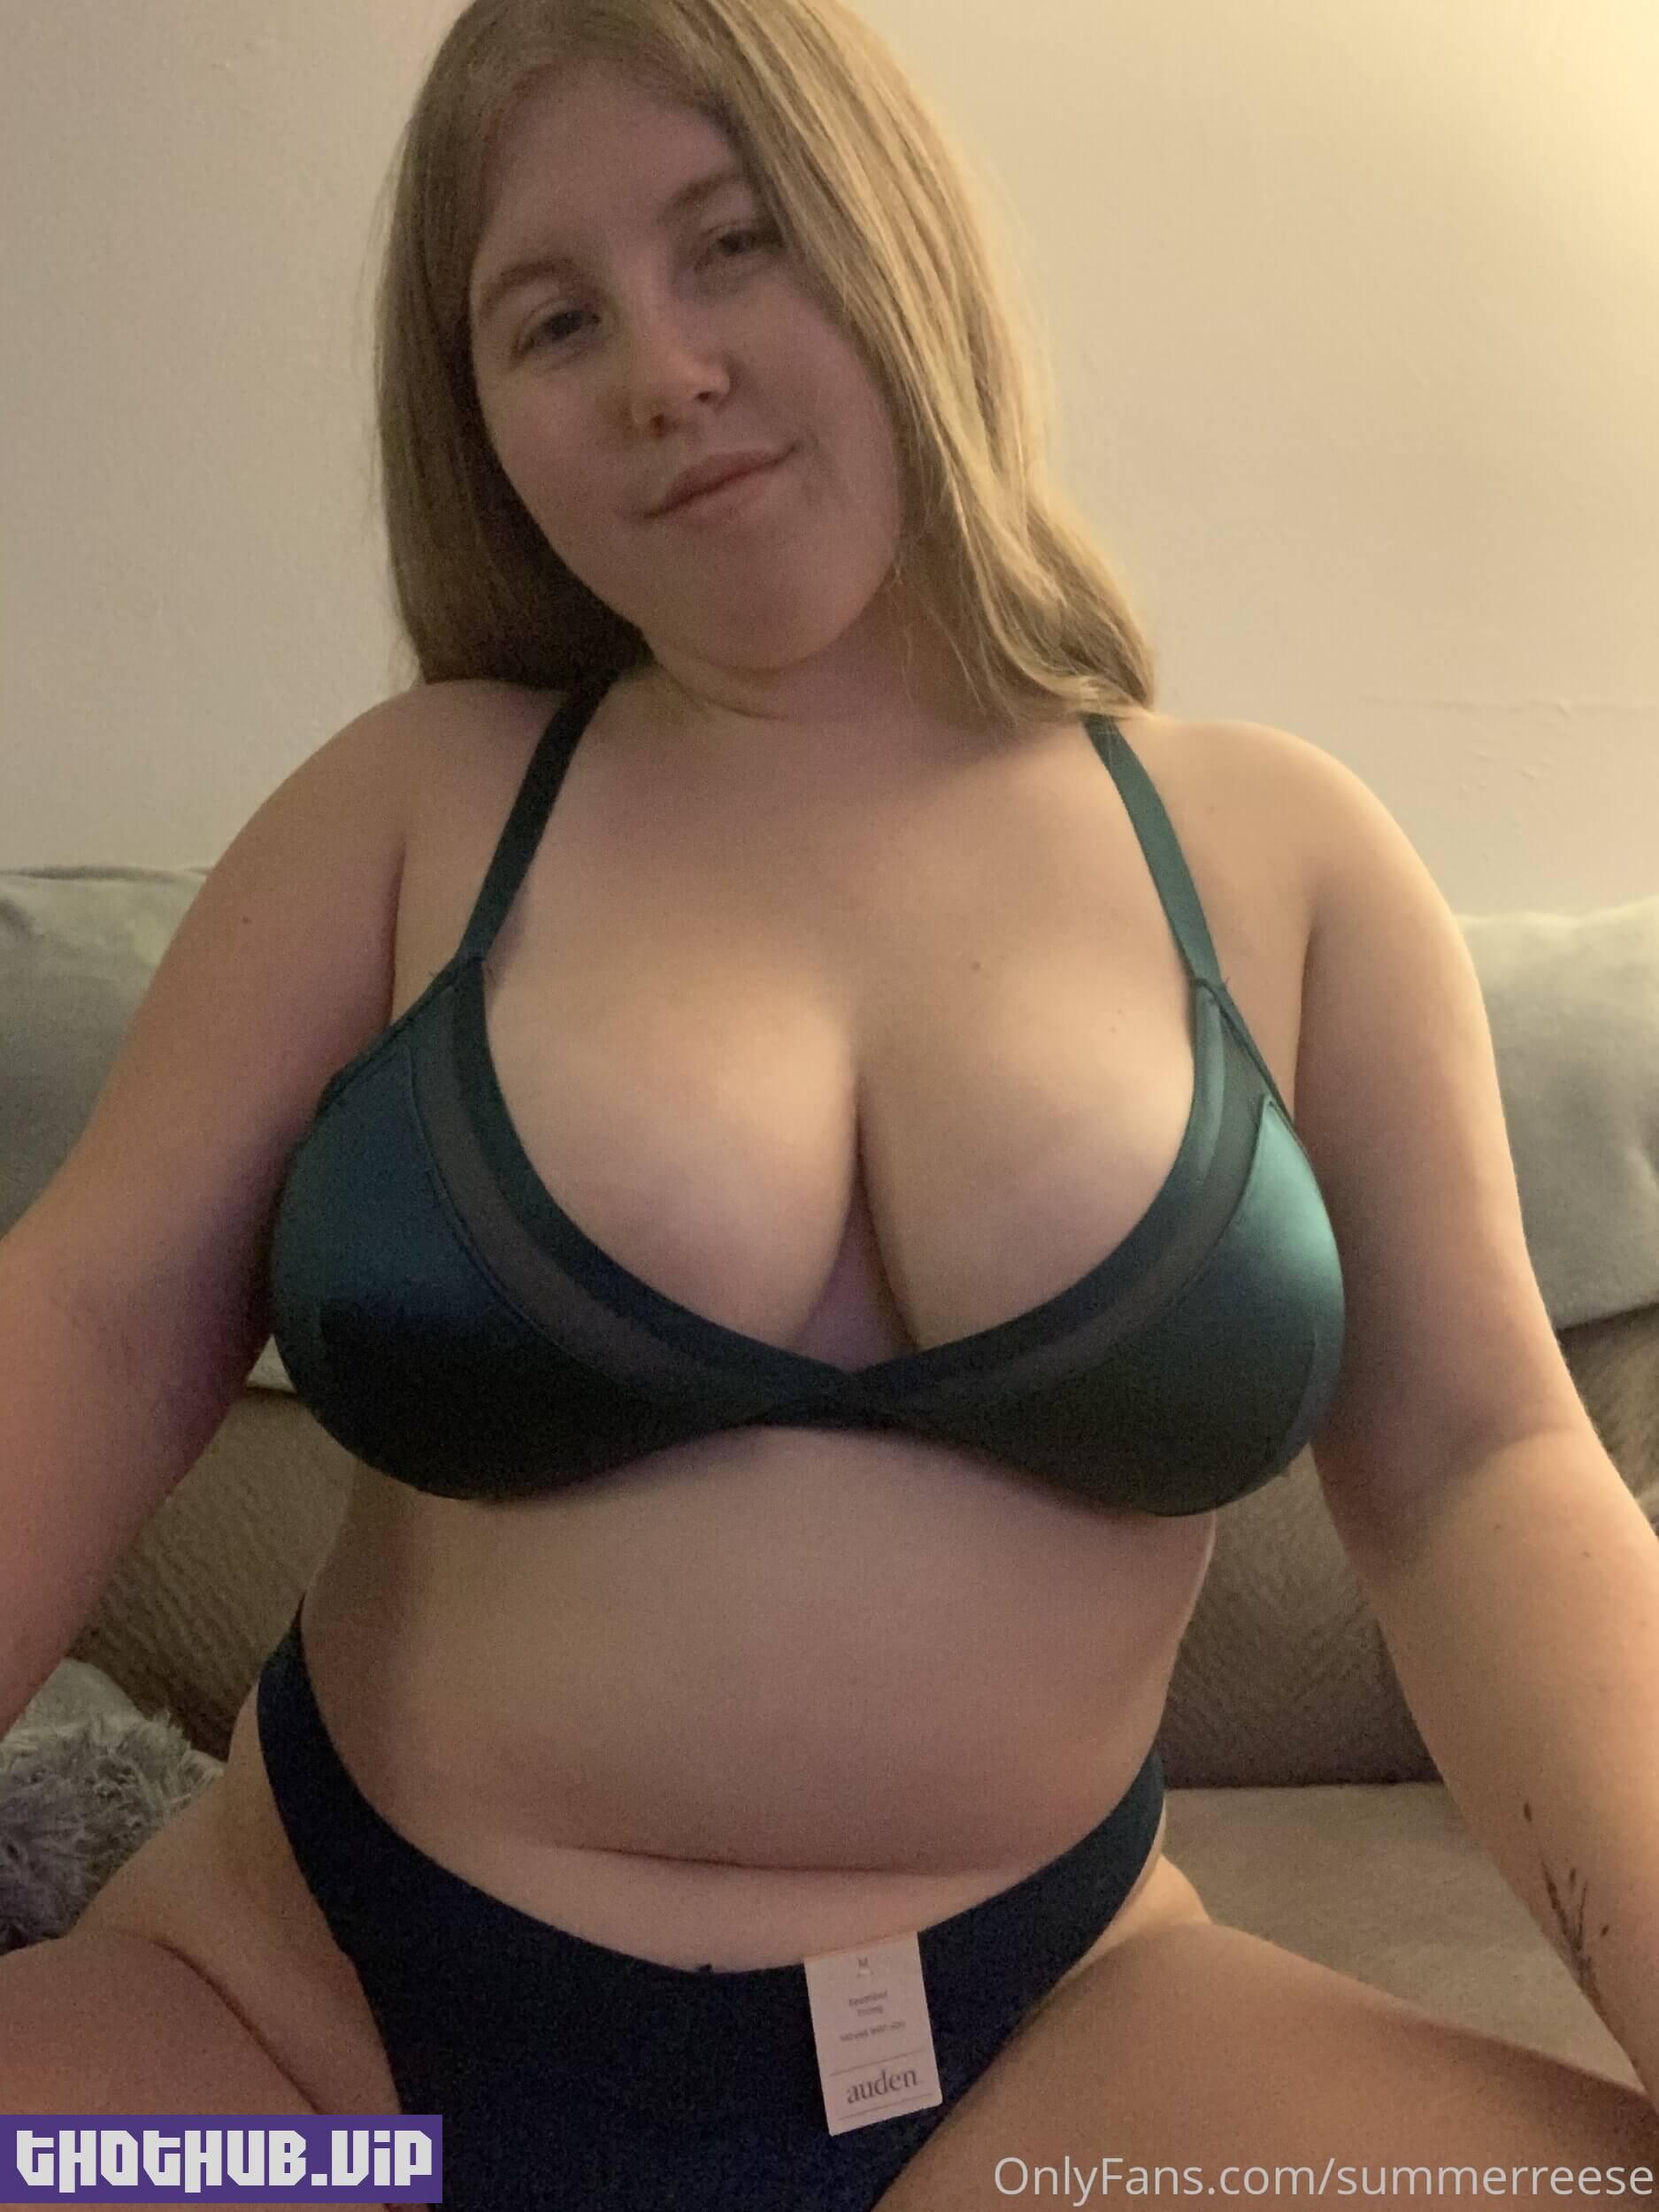 Summer reese onlyfans 5 Summer Reese onlyfans